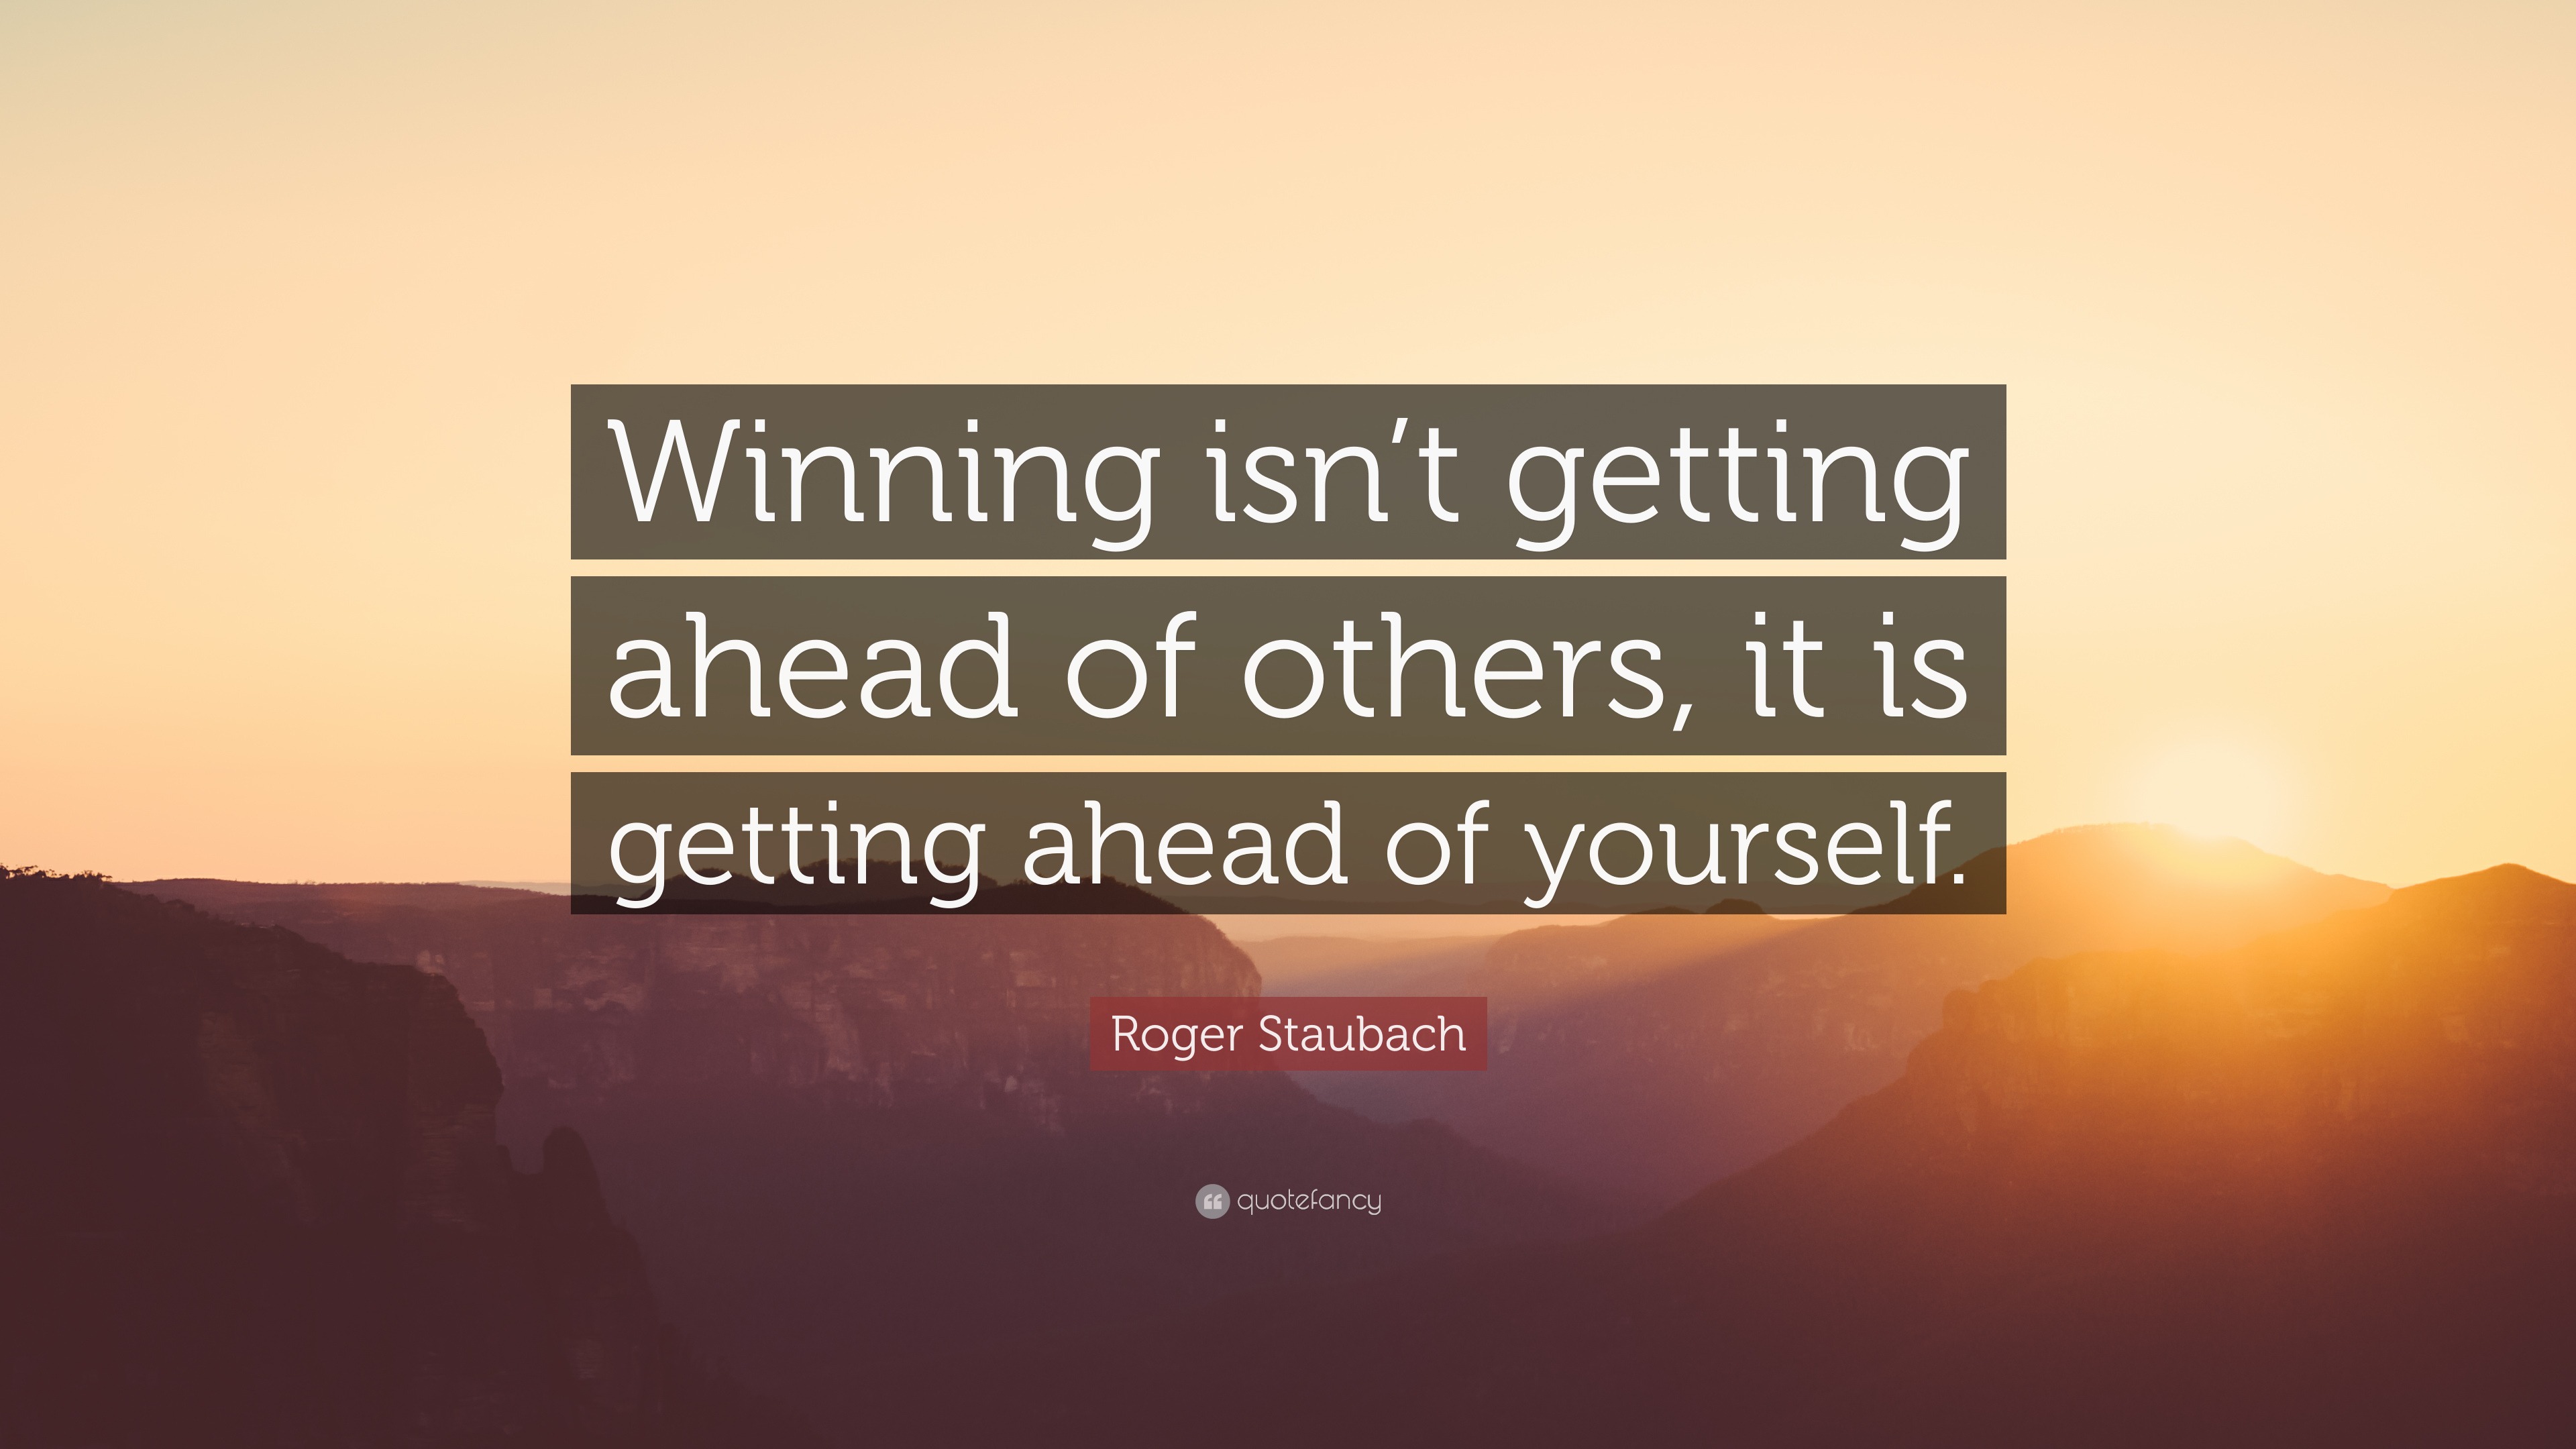 Roger Staubach Quote: “Winning isn’t getting ahead of others, it is ...